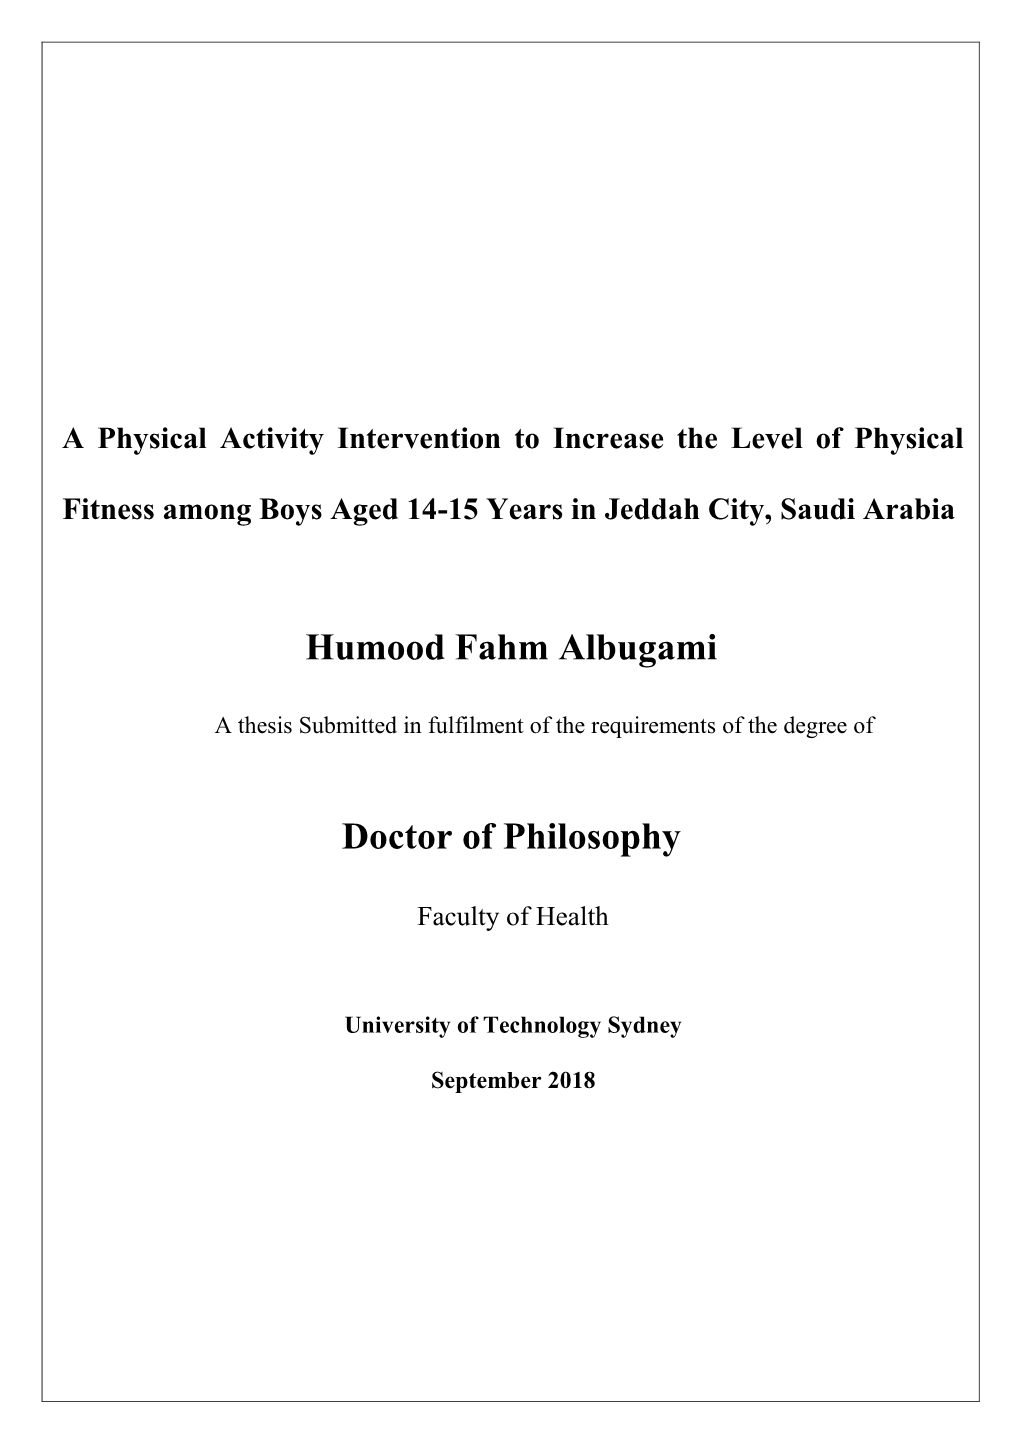 A Physical Activity Intervention to Increase the Level of Physical